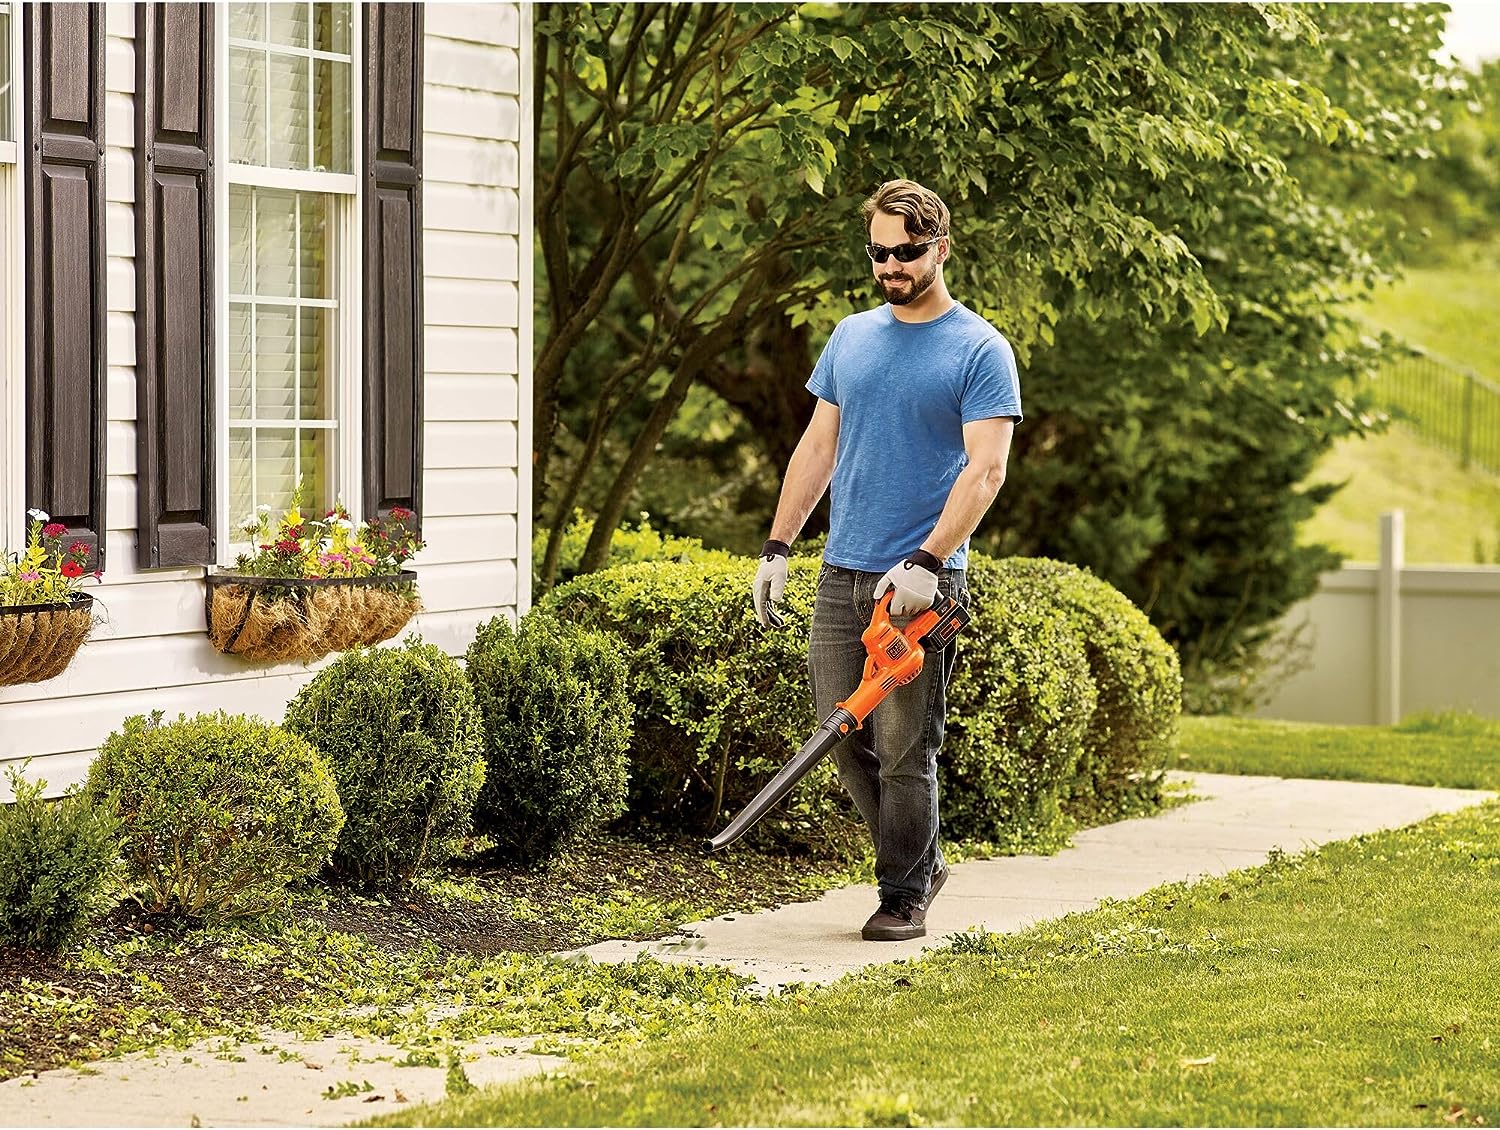 https://bigbigmart.com/wp-content/uploads/2023/08/BLACKDECKER-40V-MAX-Cordless-Leaf-Blower-Lawn-Sweeper-125-mph-Air-Speed-Lightweight-Design-Battery-and-Charger-Included-LSW40C0.jpg